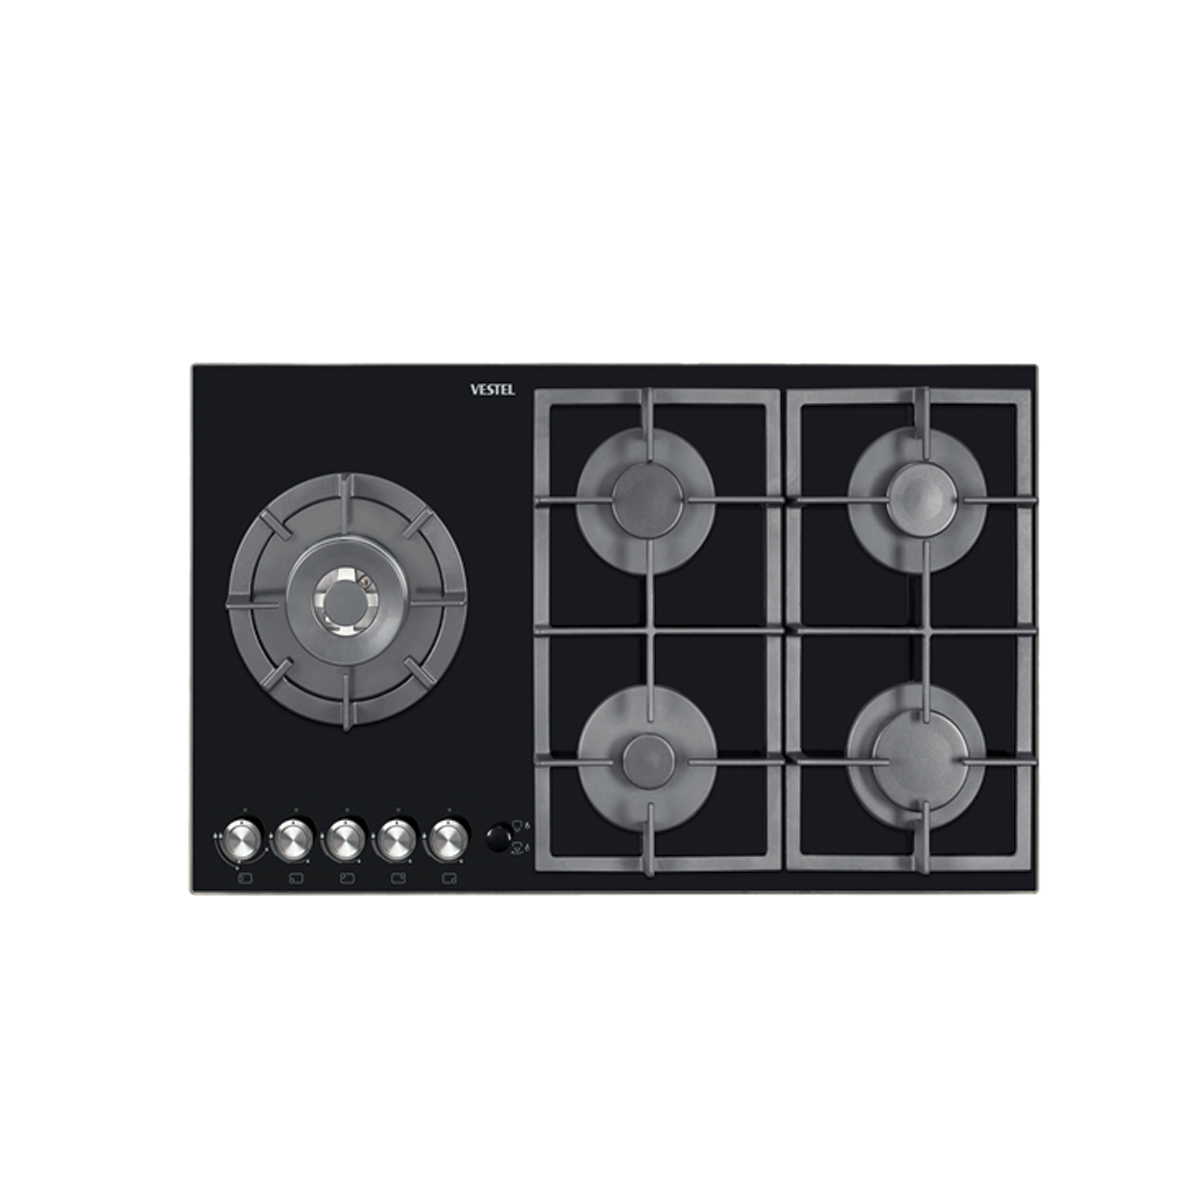 Built-In Cooker AOB 9125 W